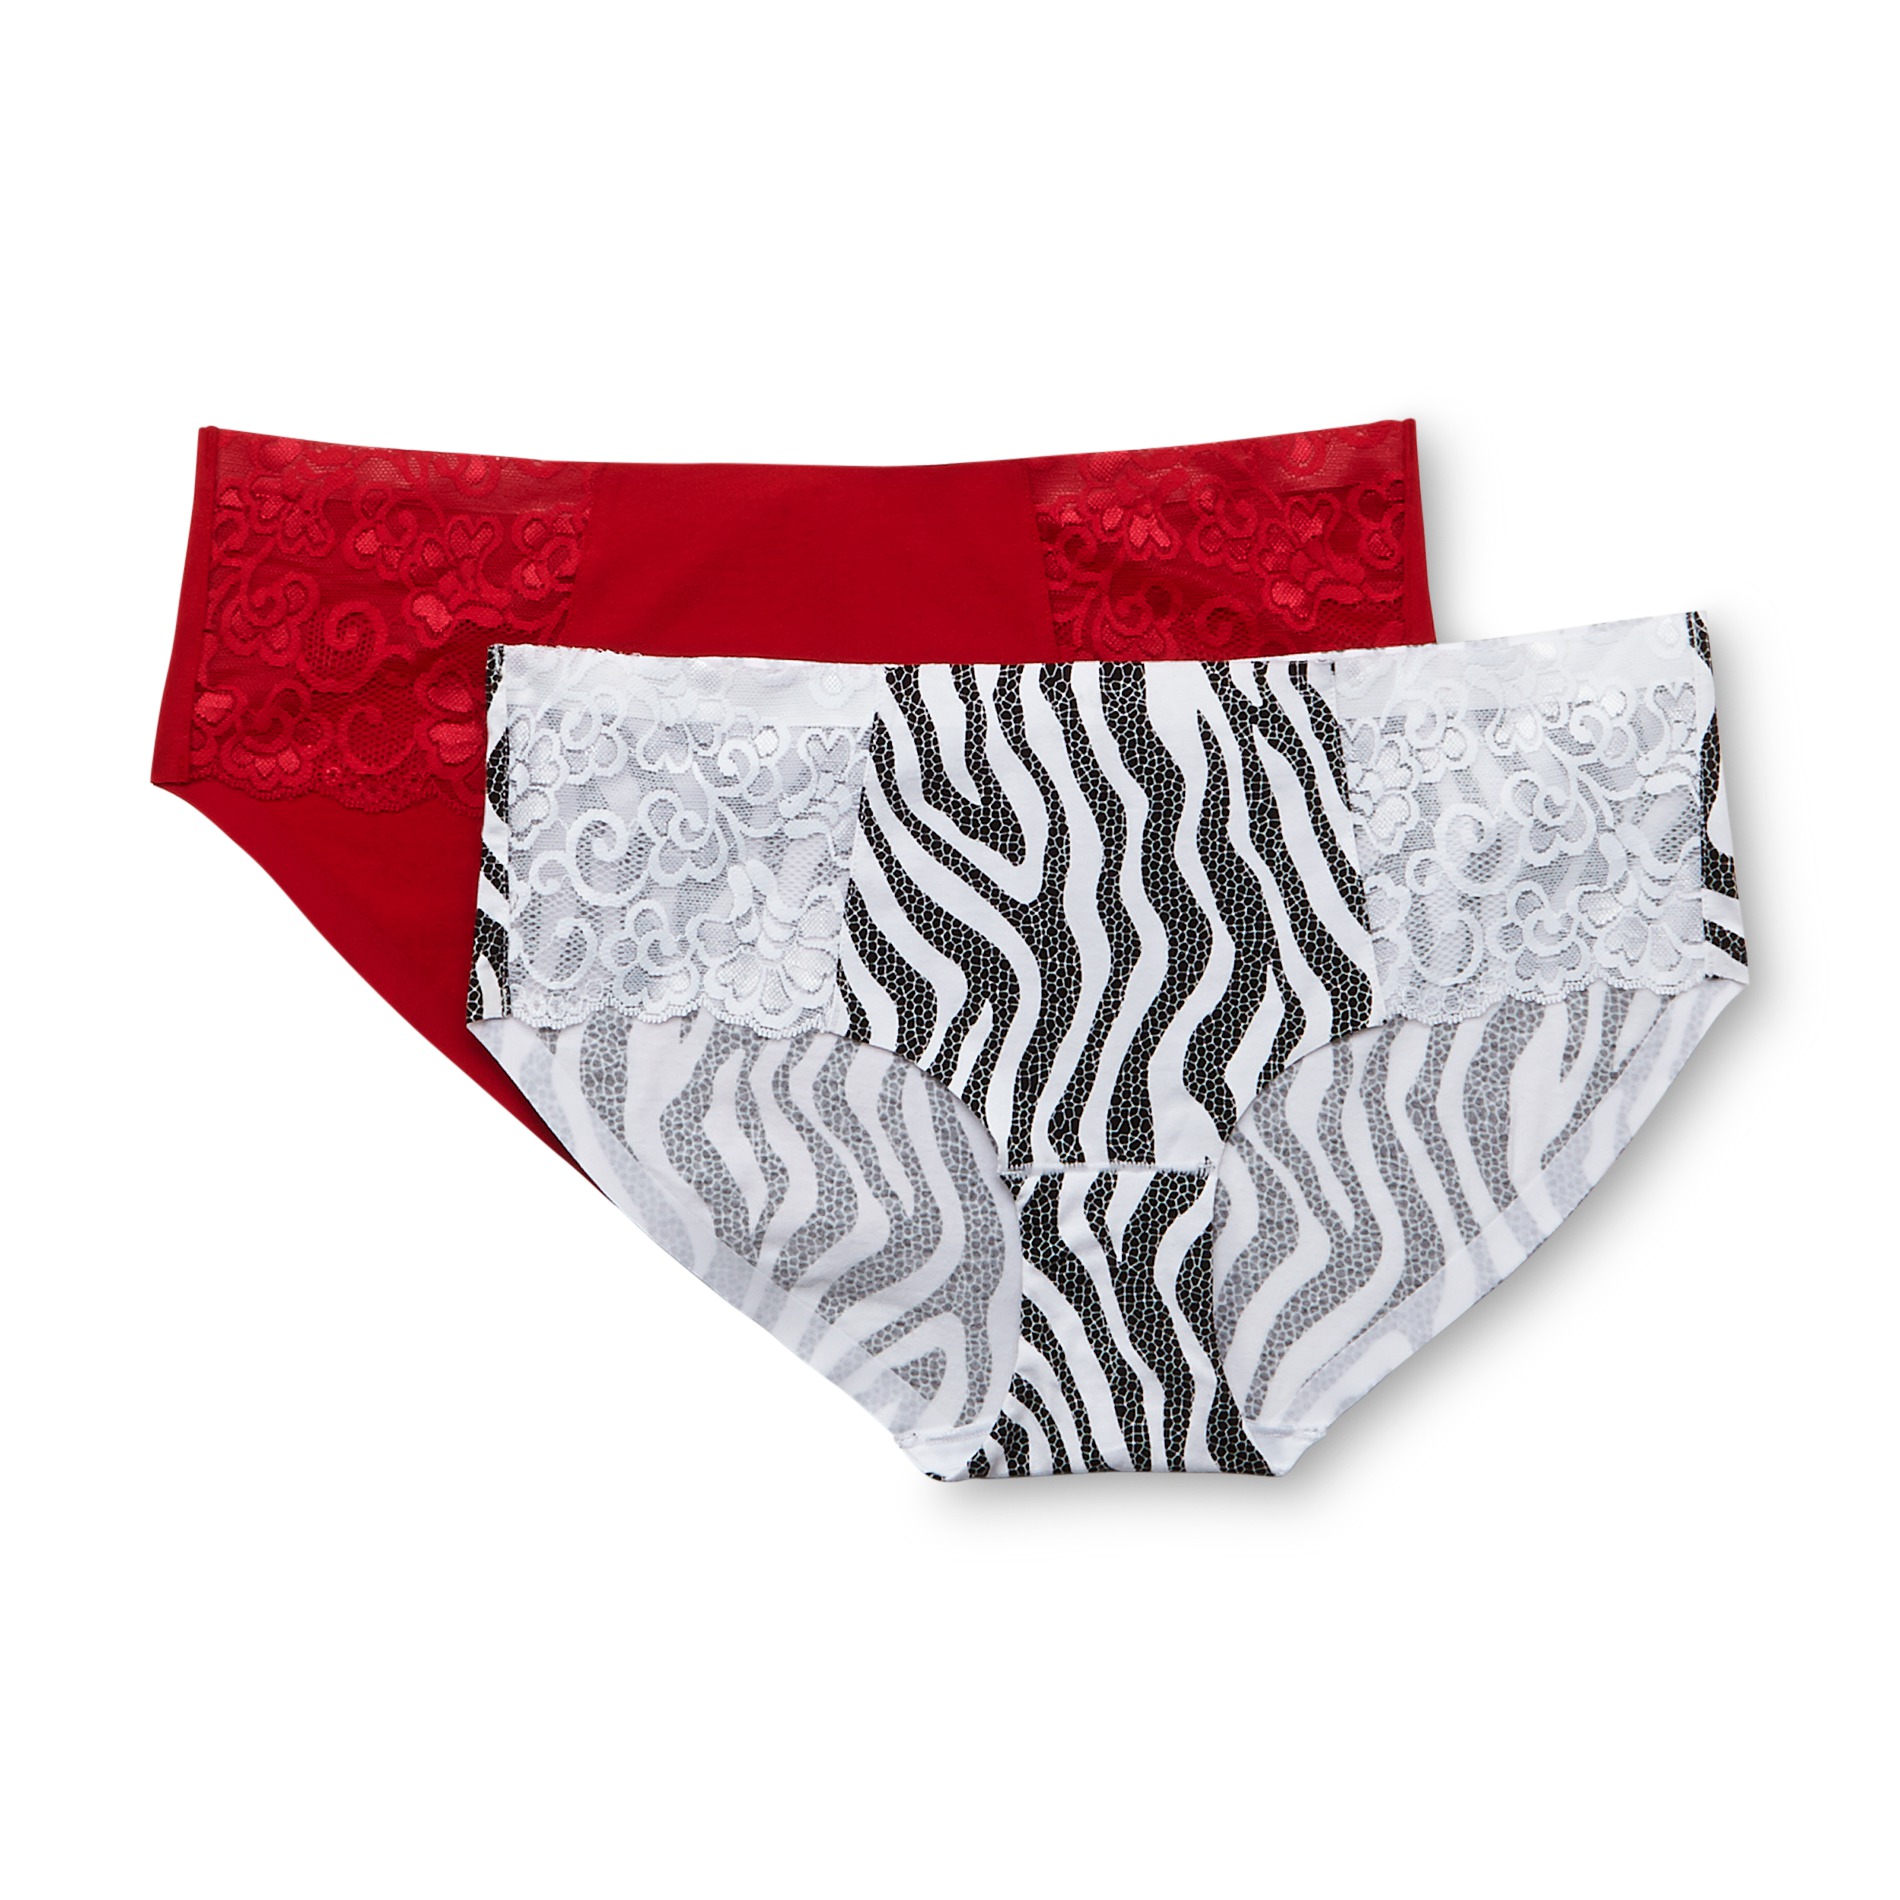 Imagination by Lamour Women's 2-Pack Lace Hipster Panties - Zebra Print